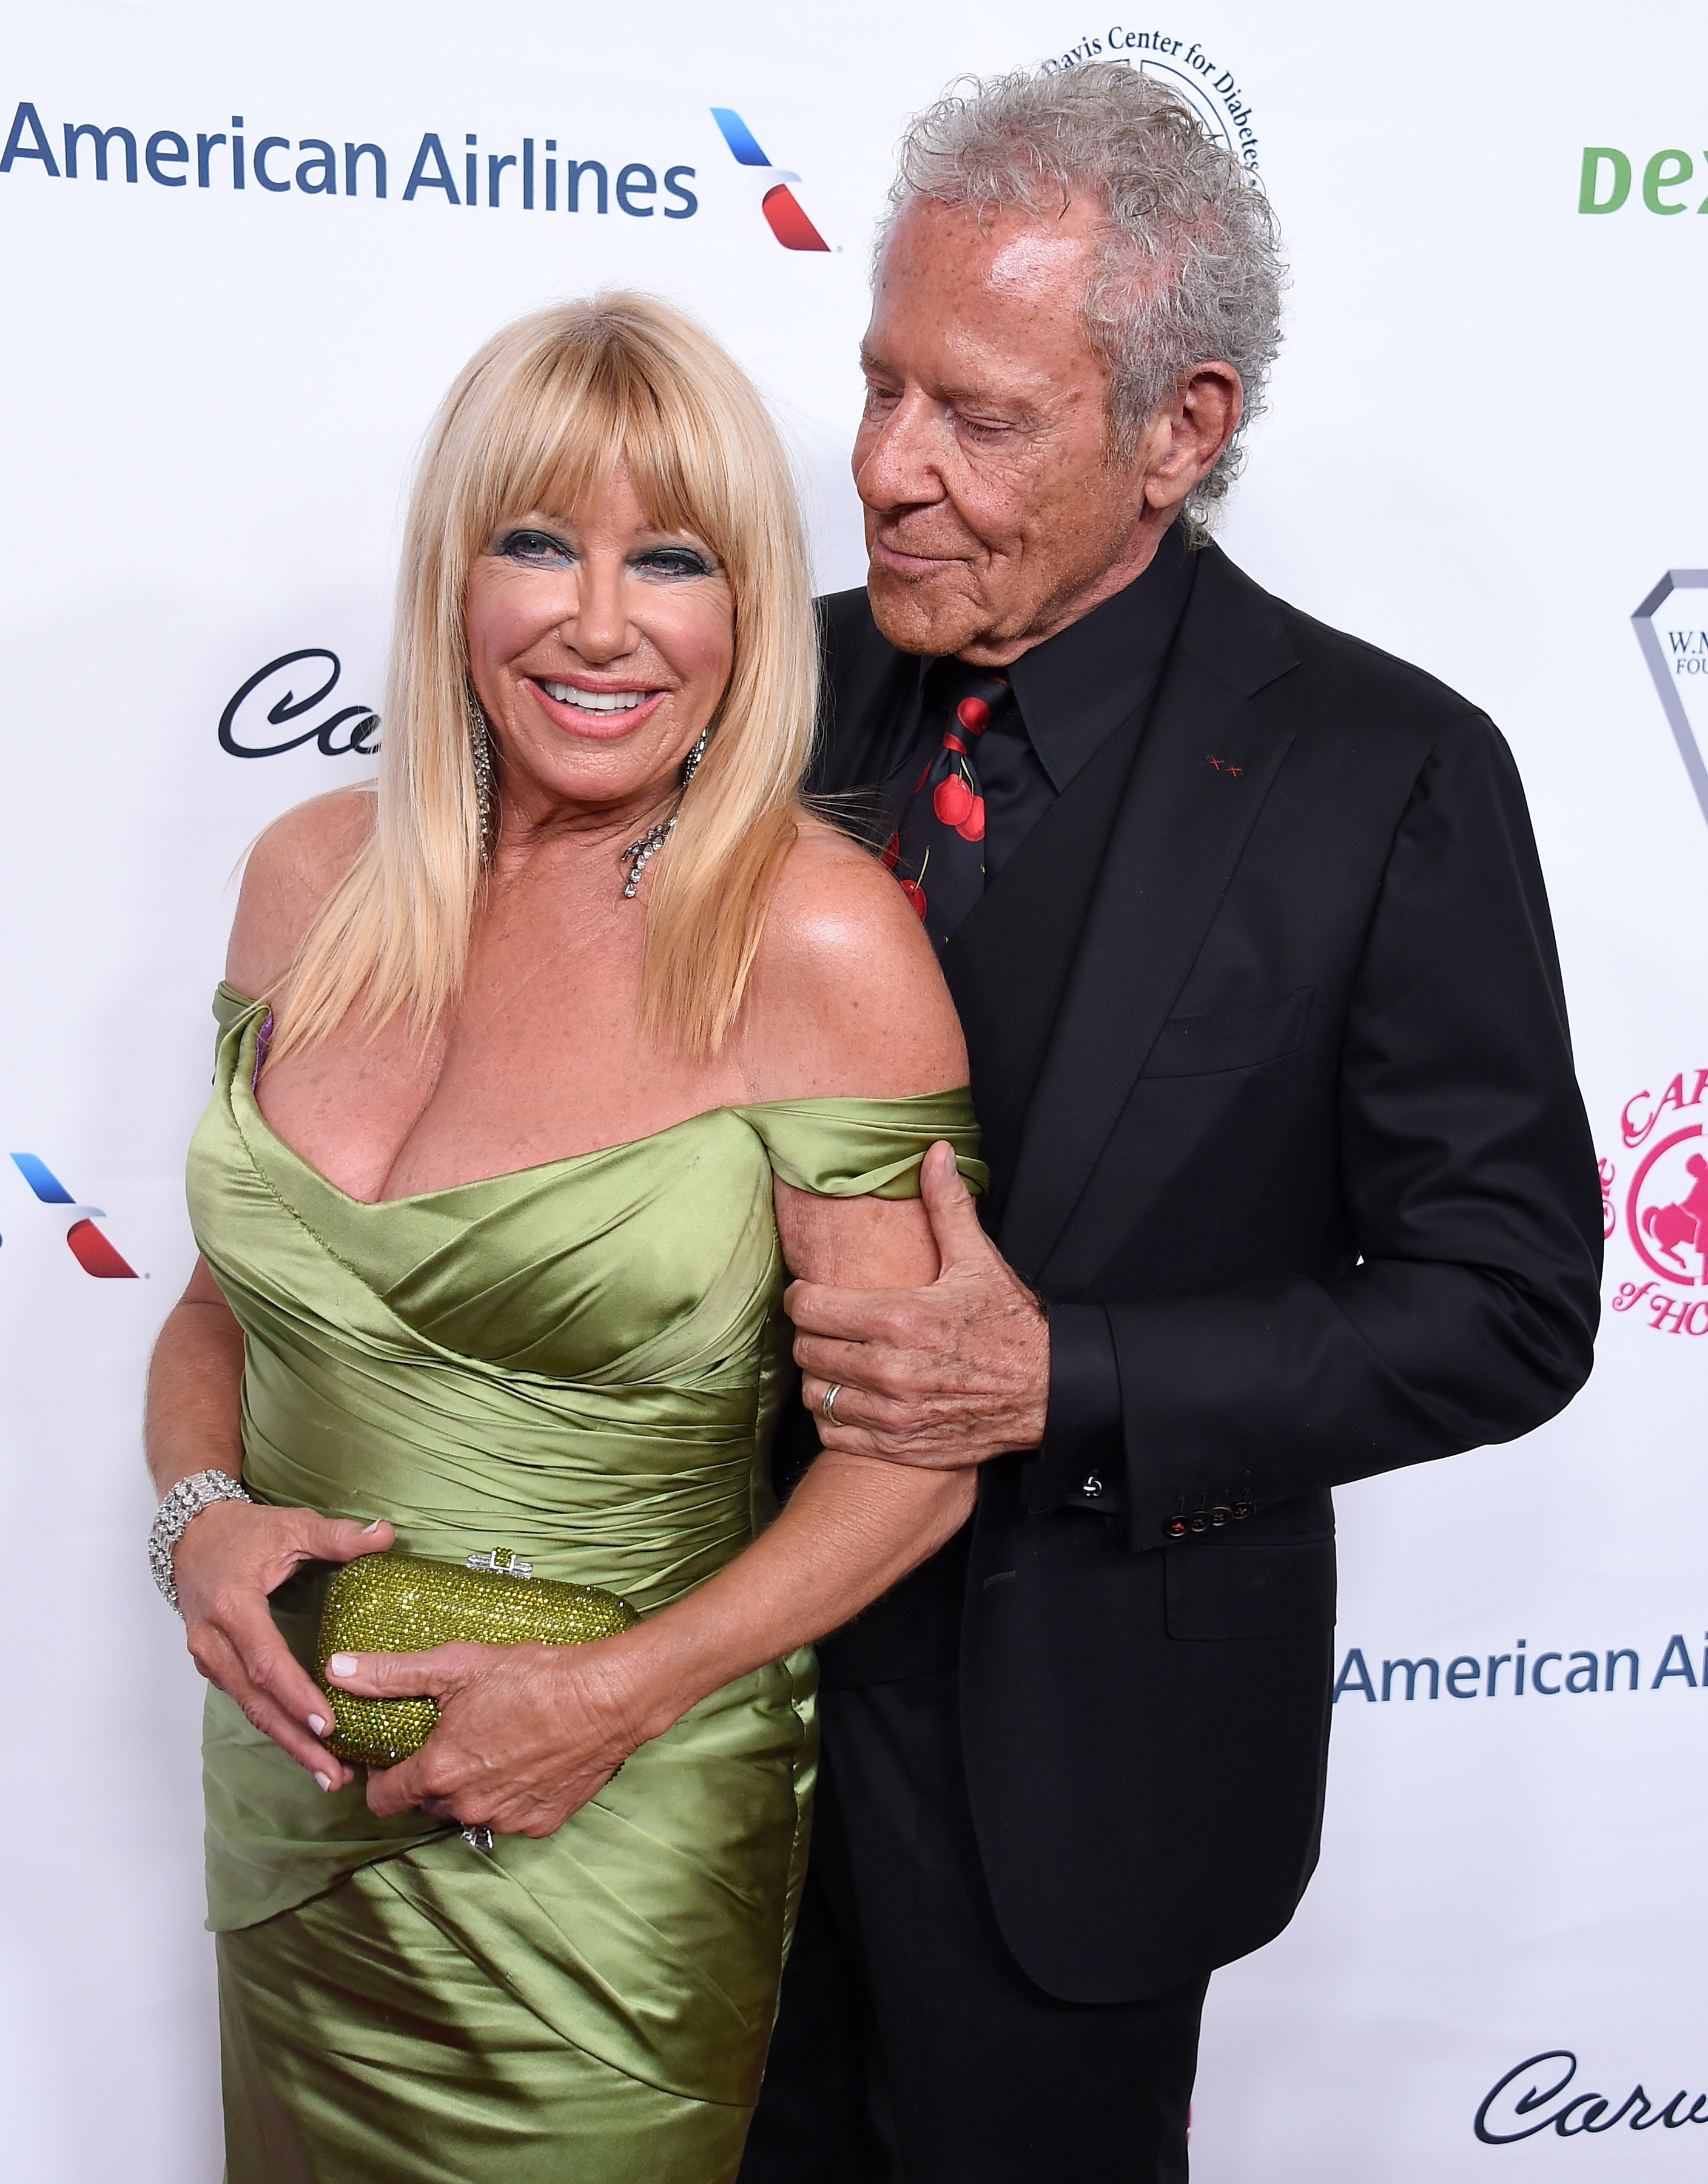 Suzanne Somers and Alan Hamel at the 2018 Carousel of Hope Ball at The Beverly Hilton Hotel on October 6, 2018 in Beverly Hills, California | Source: Getty Images